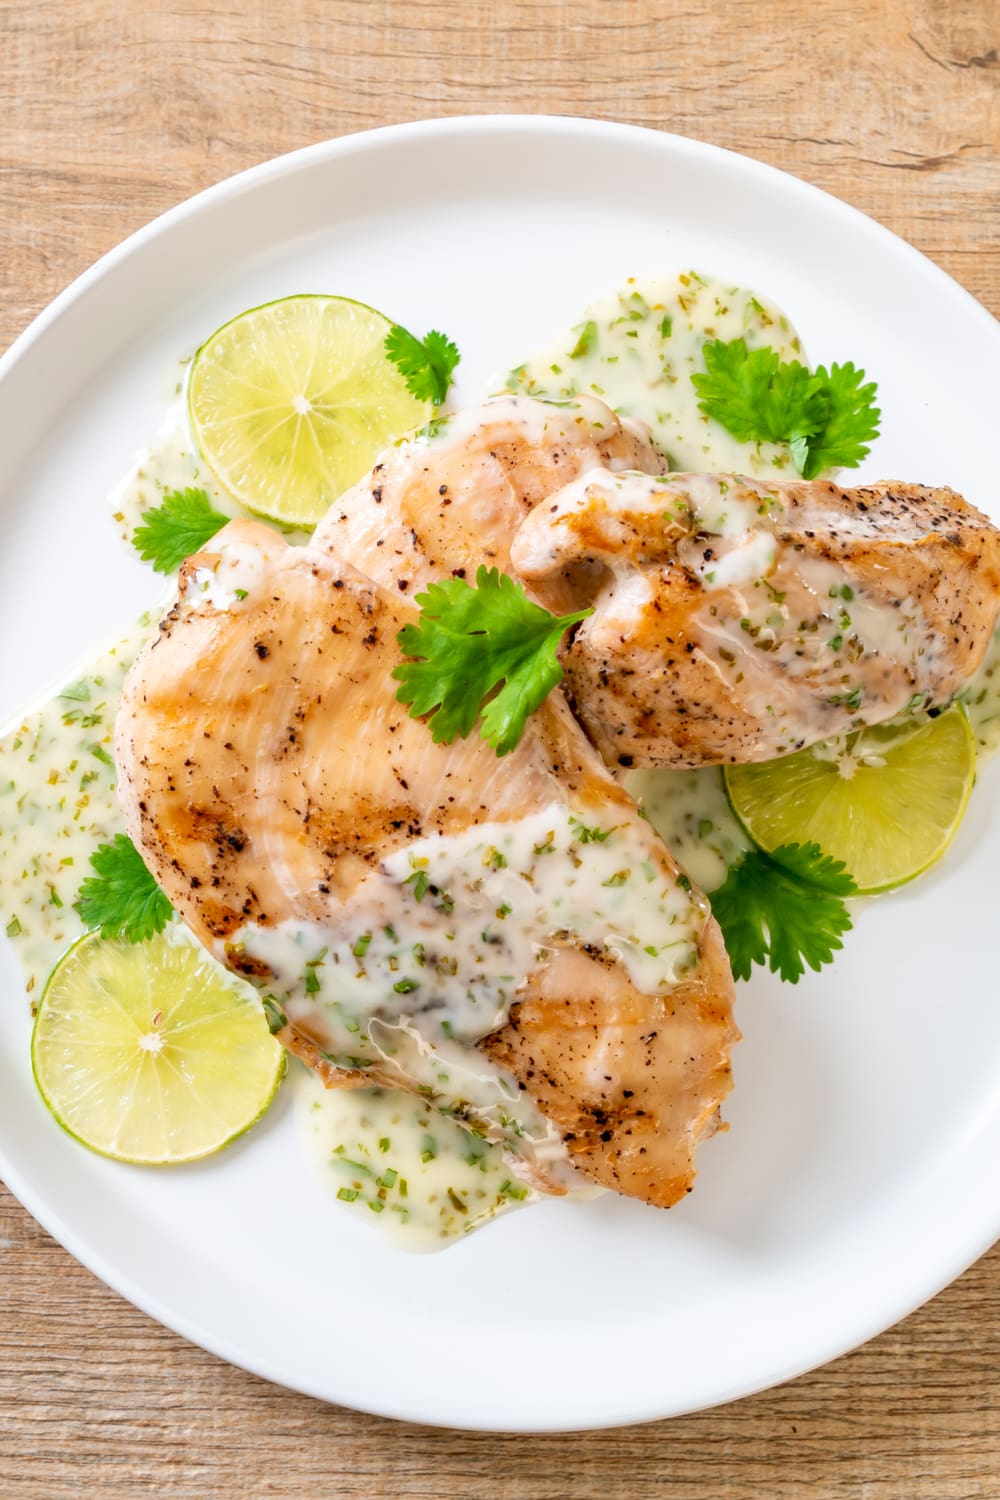 Chicken breast served with lime sauce.